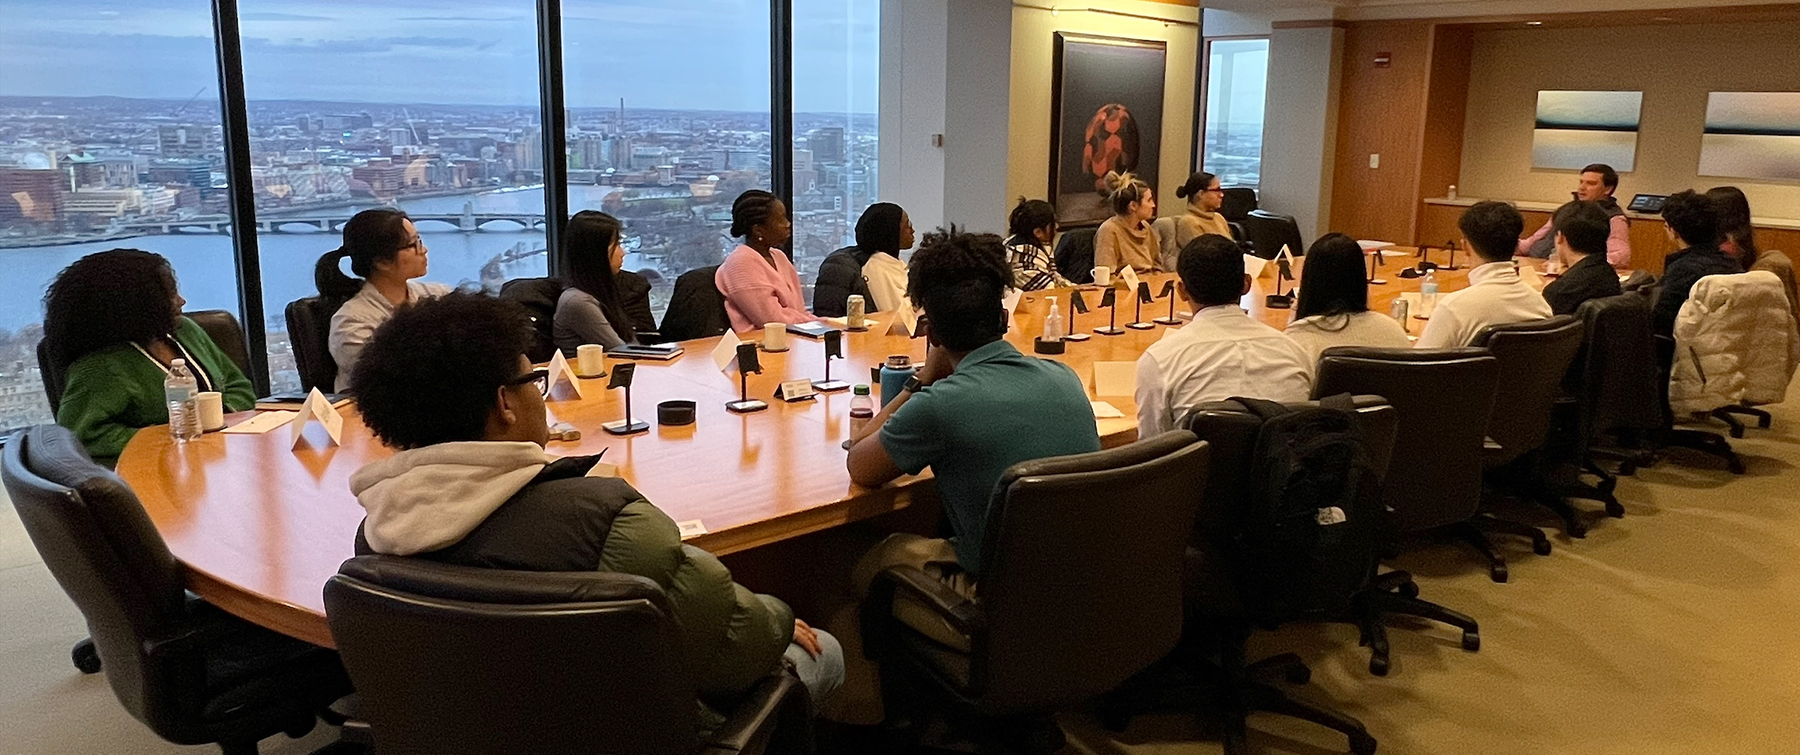 F1RST Scholars visiting a Boston company during an industry visit